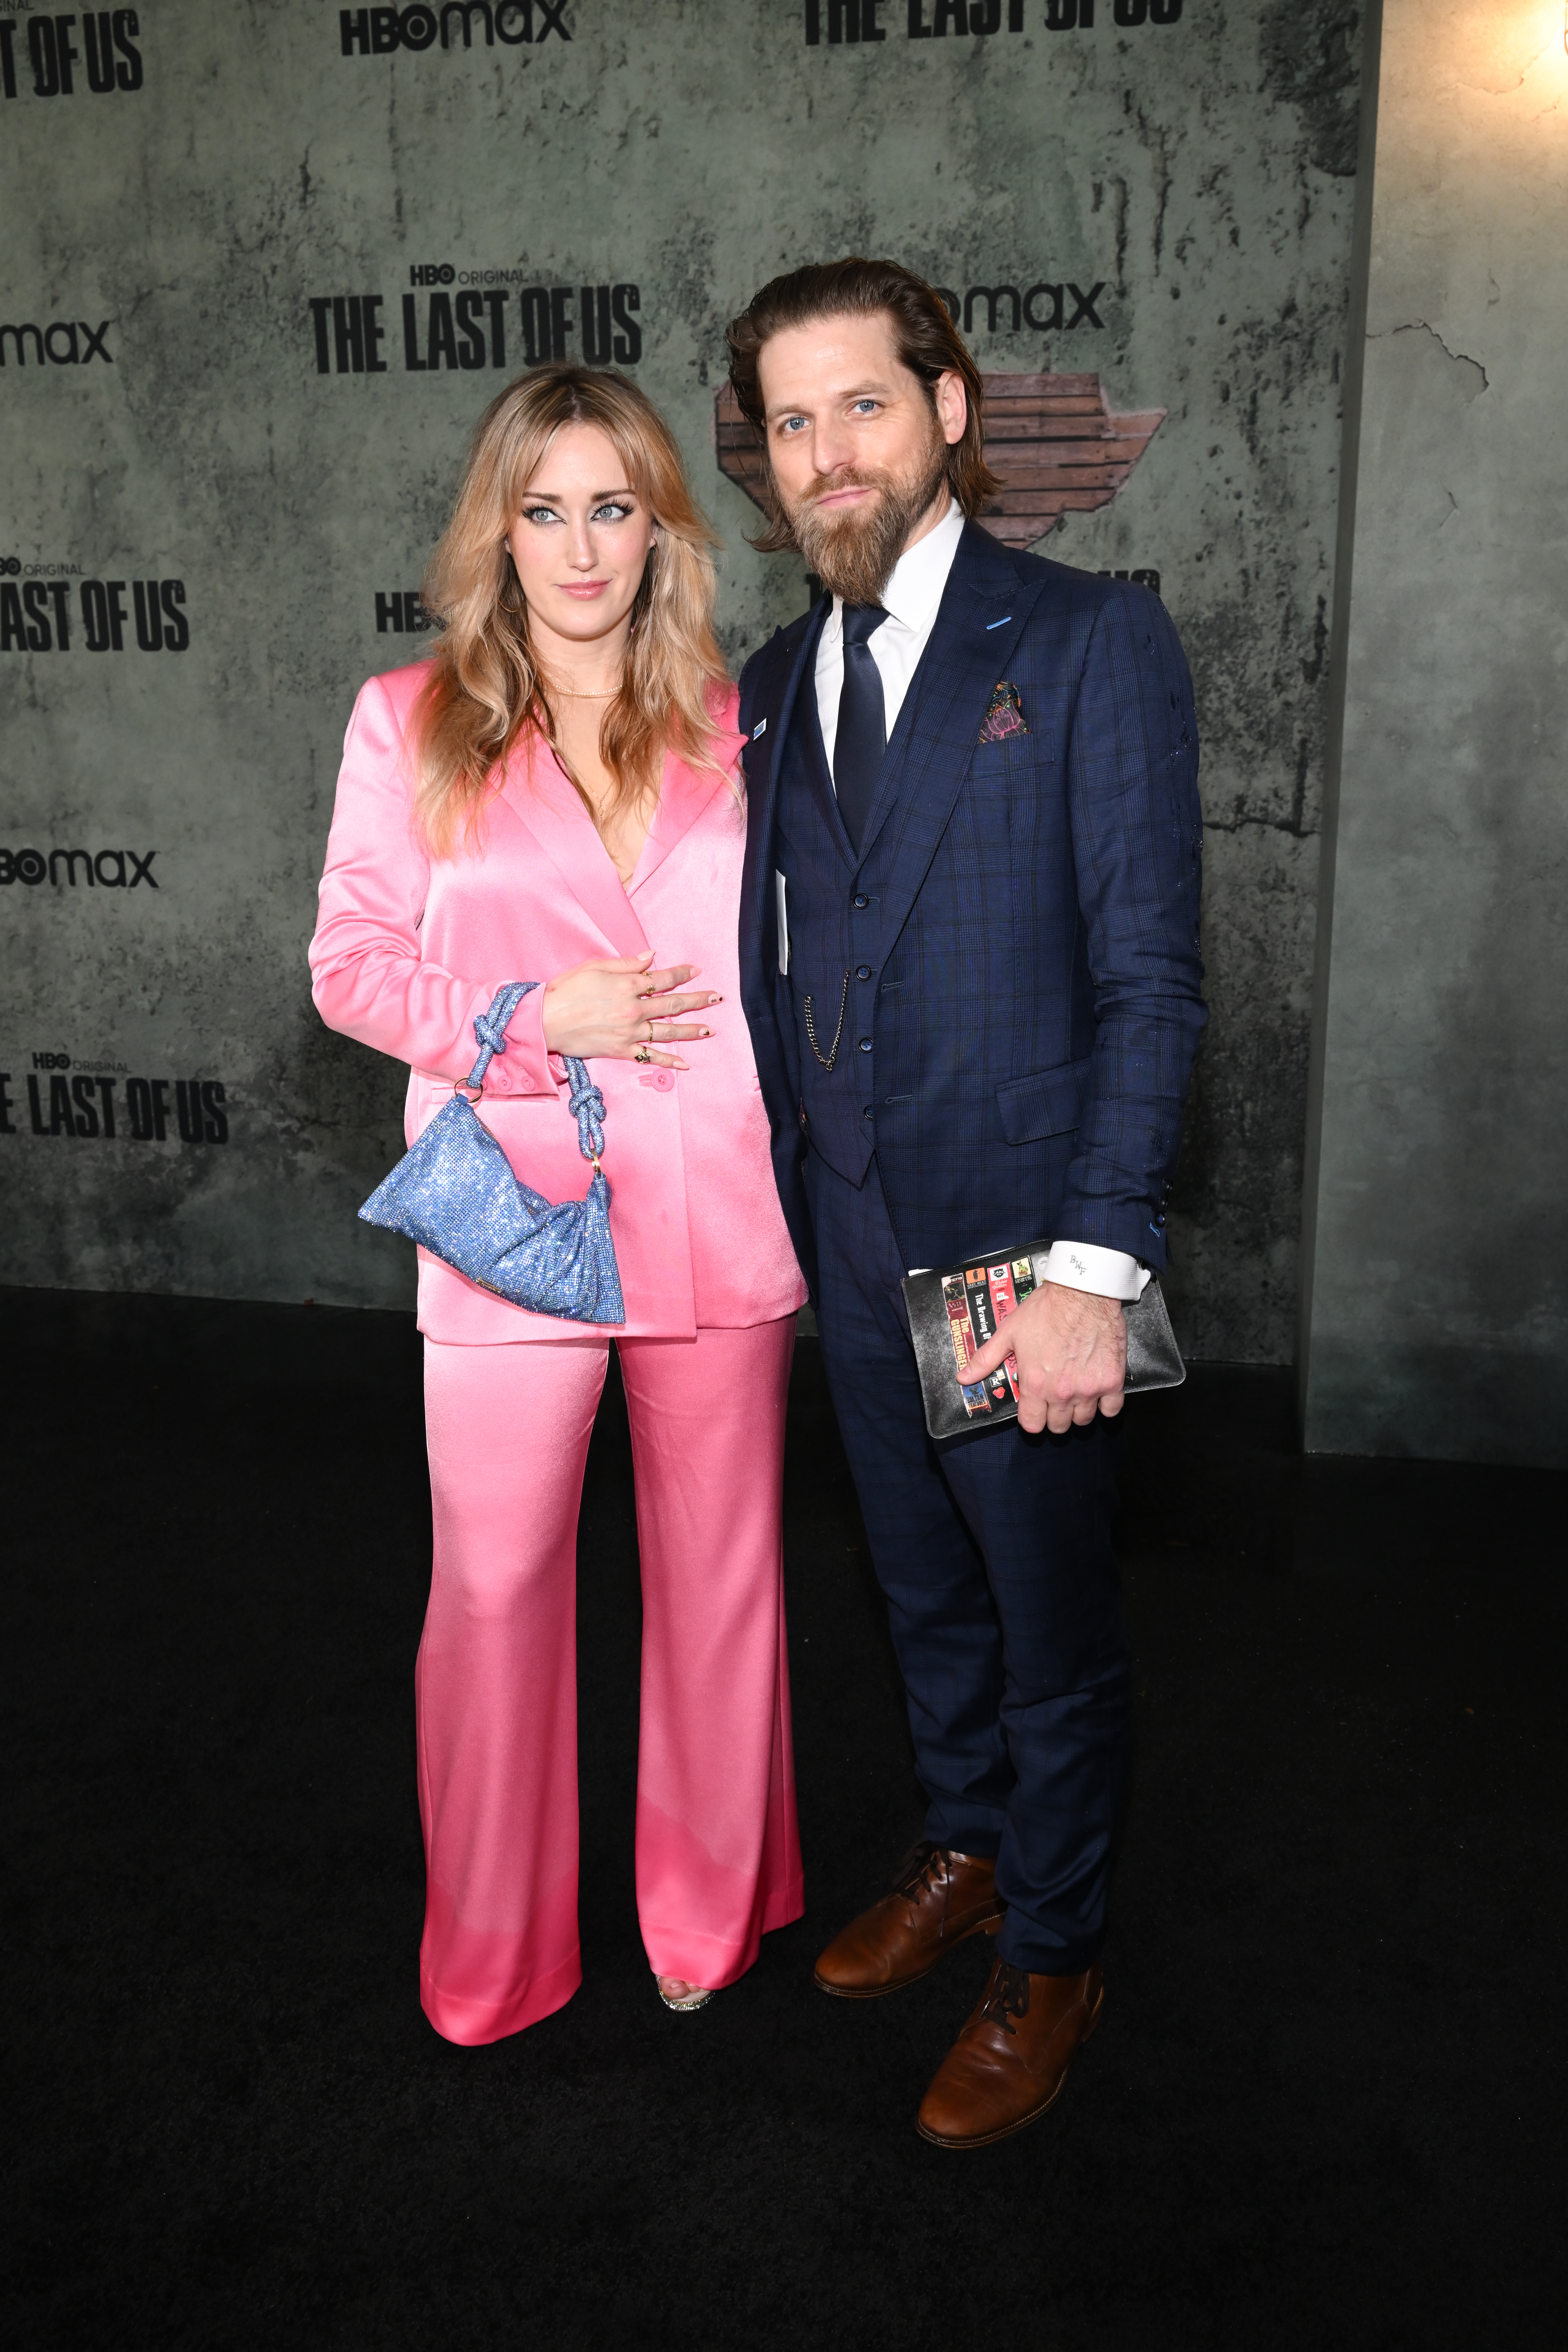 Ashley Johnson and Brian W. Foster at the Los Angeles premiere of HBO's original series "The Last of Us" on January 9, 2023. | Source: Getty Images